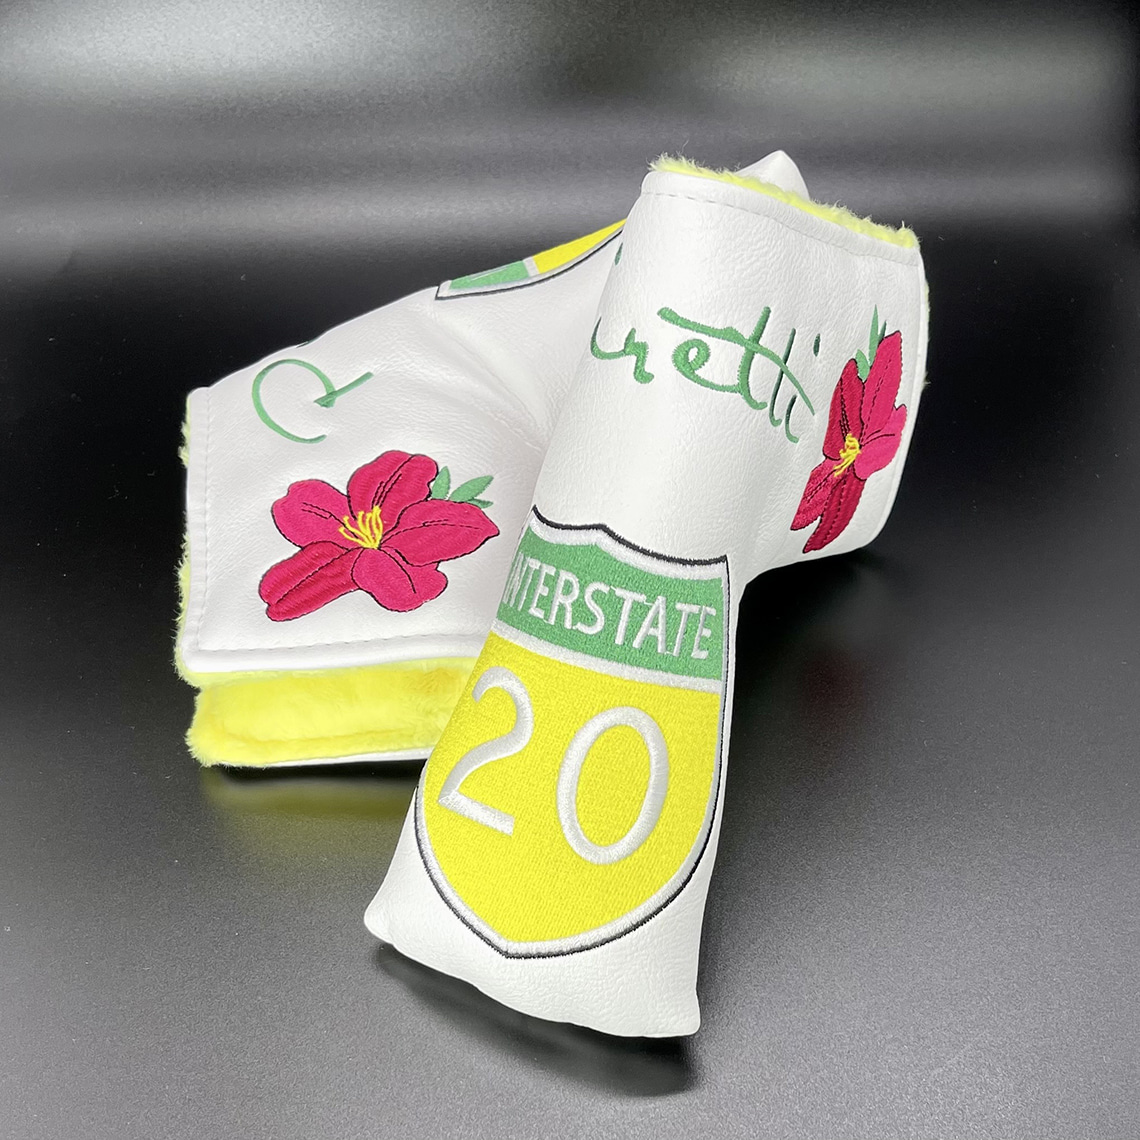 Augusta Interstate 20 Limited Edition Headcover